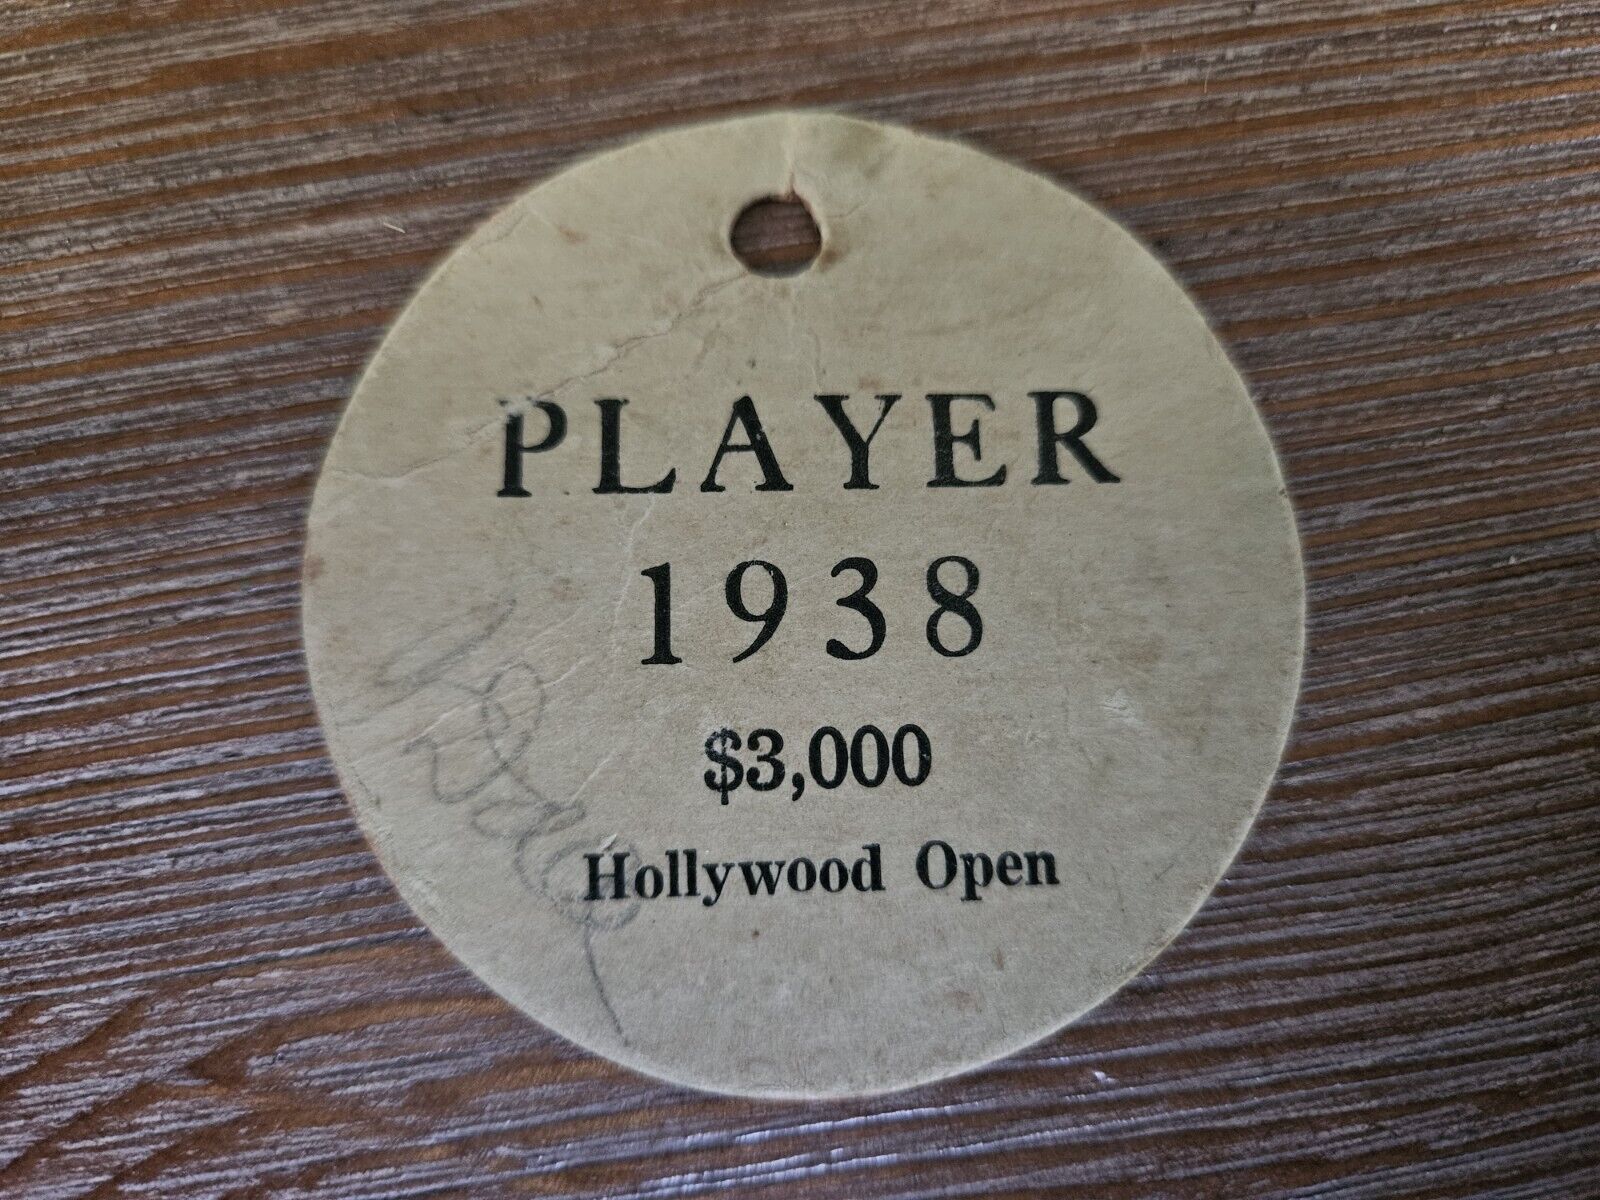 1938 Hollywood Open Player Badge Golf Ticket Byron Nelson 6th PGA Tour Win